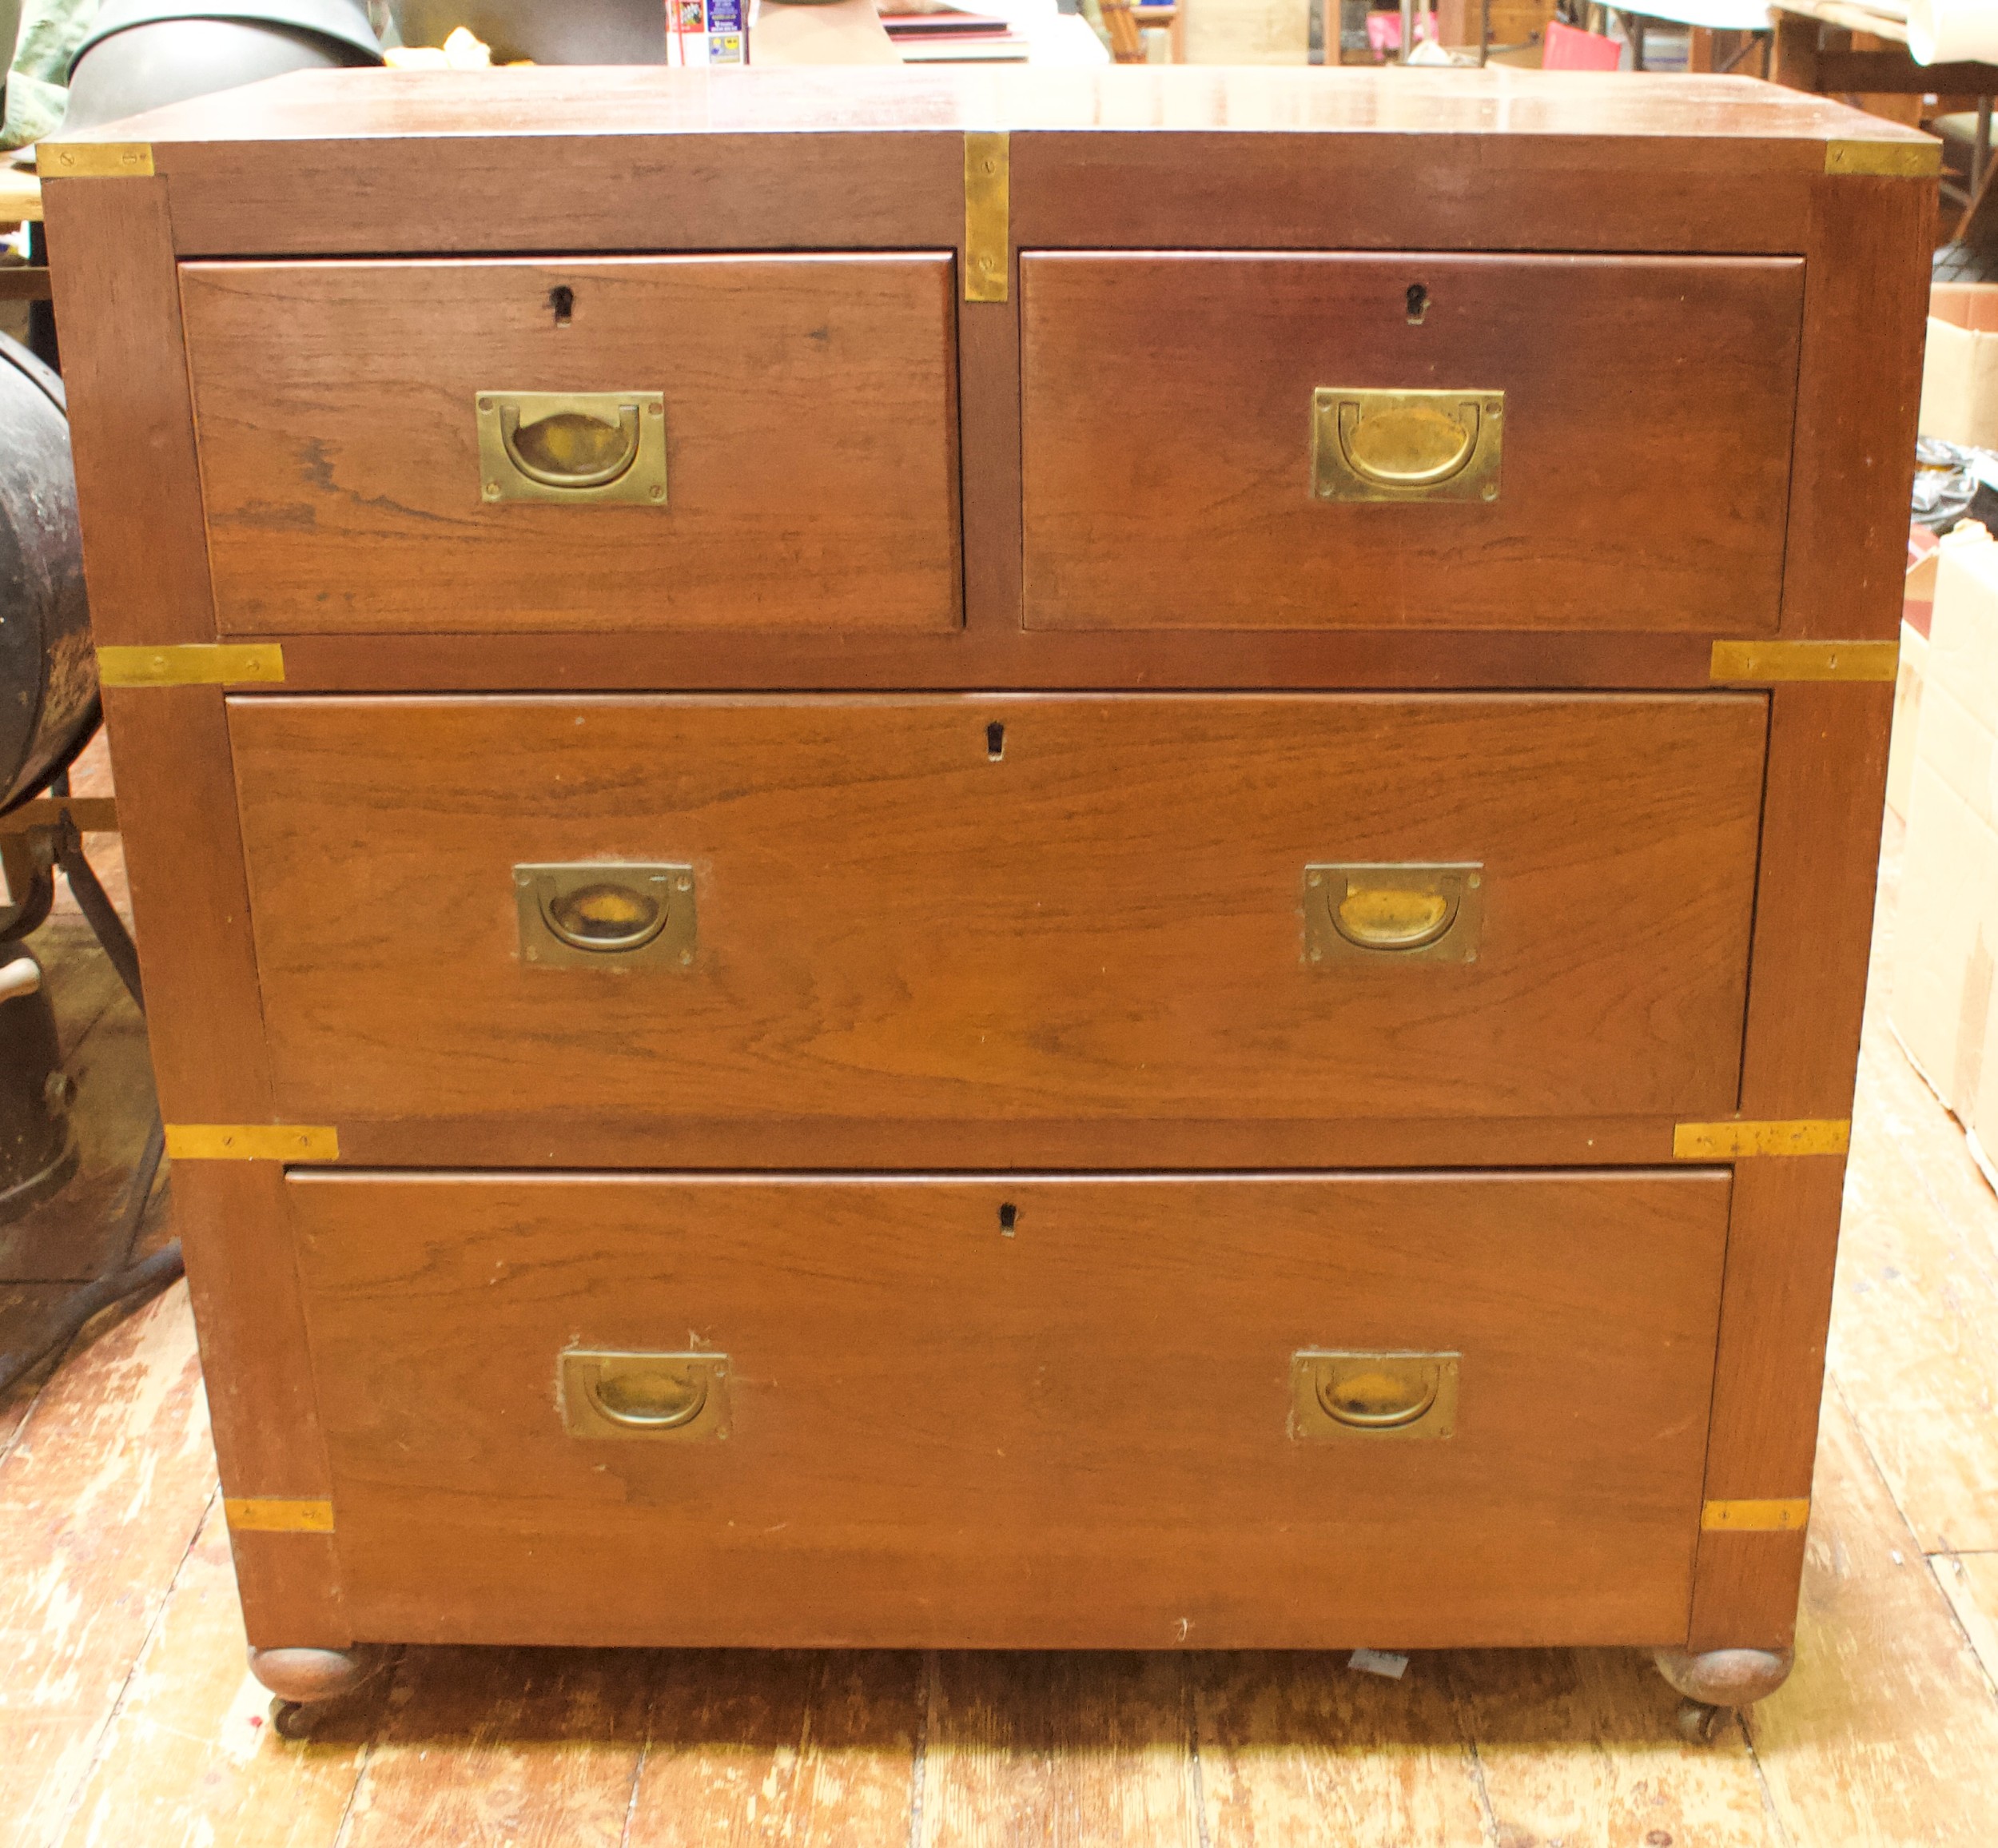 A 19th Century brass-bound teak military chest of two short and two long drawers with flush brass